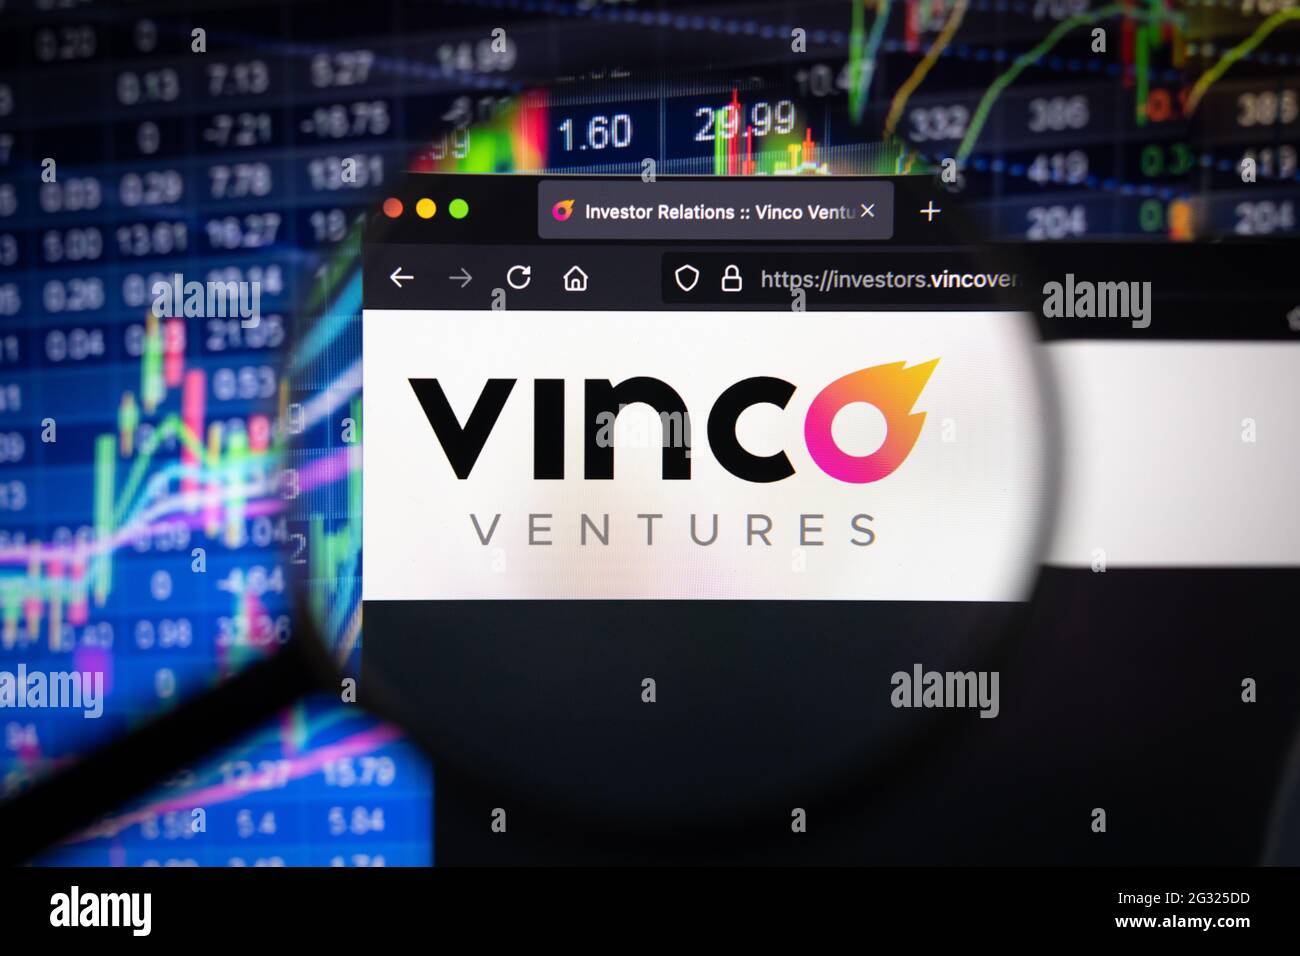 Vinco Ventures company logo on a website with blurry stock market developments in the background, seen on a computer screen through a magnifying glass Stock Photo